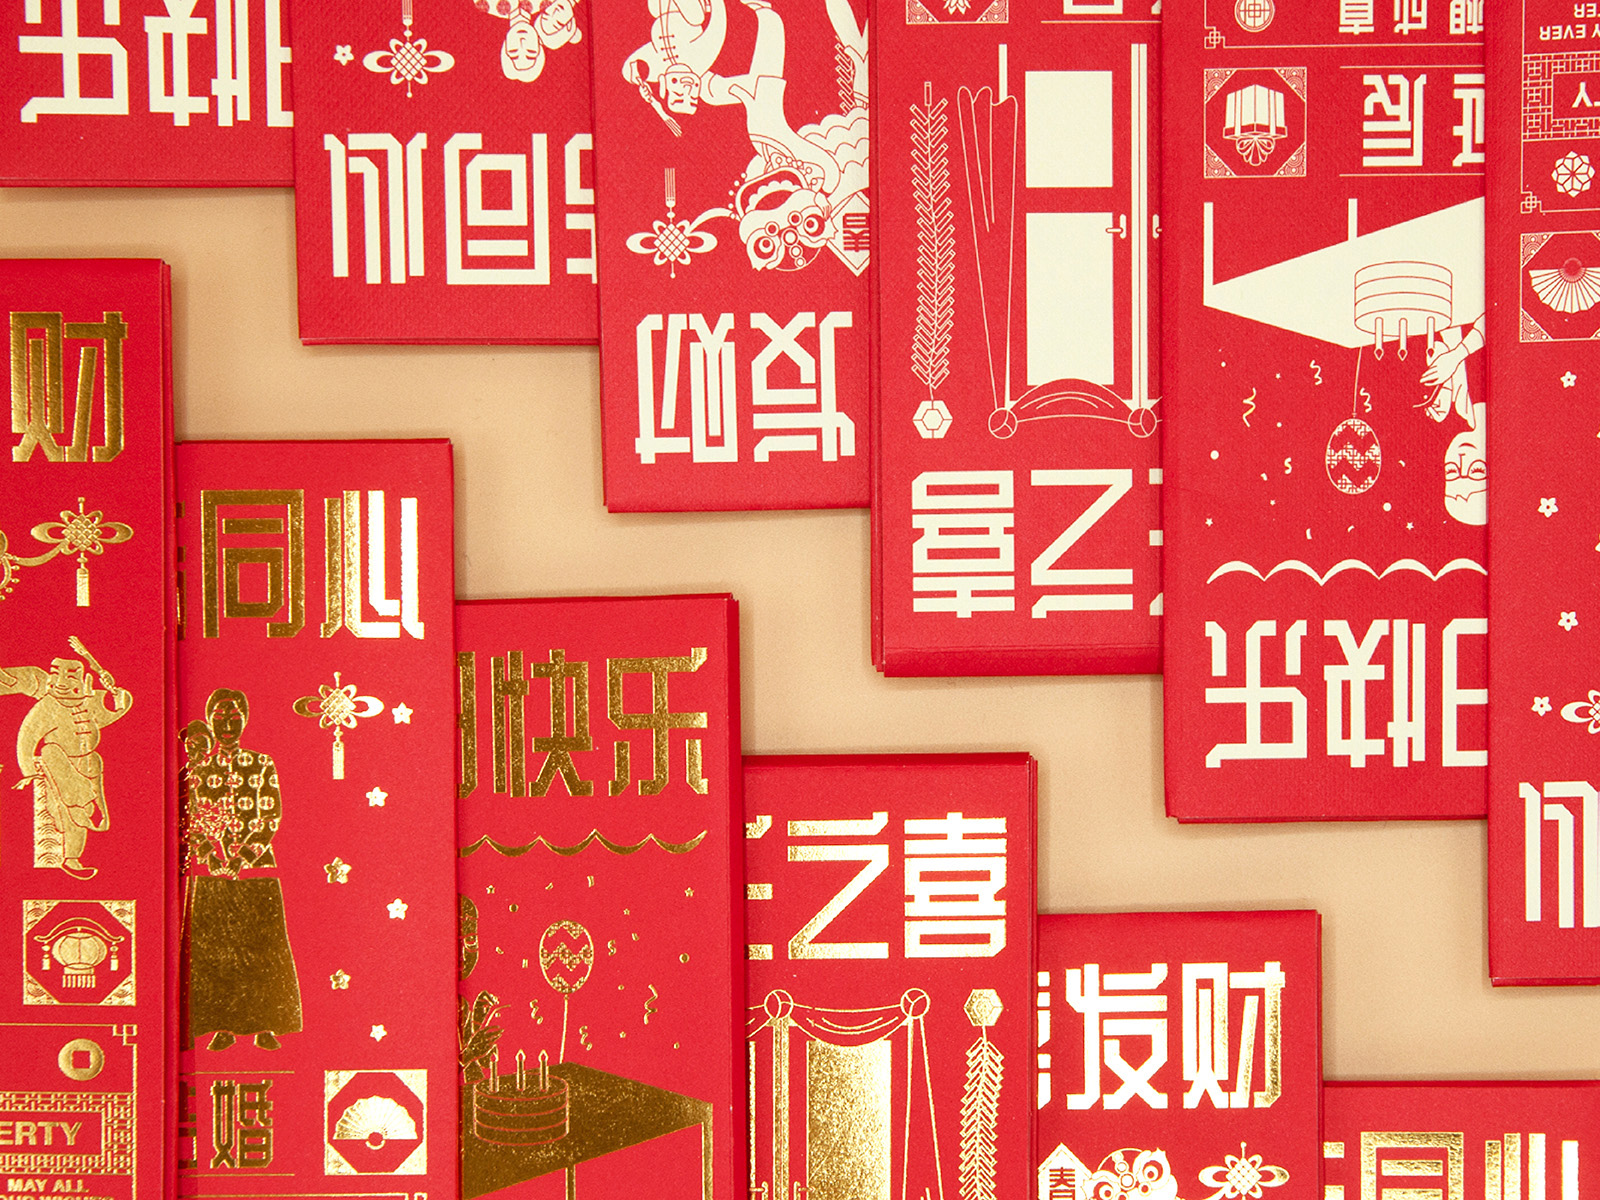 Sime Darby Chinese New Year 2020 red packet or ang pow and packaging design, normal and gold foiling printing, with product photography